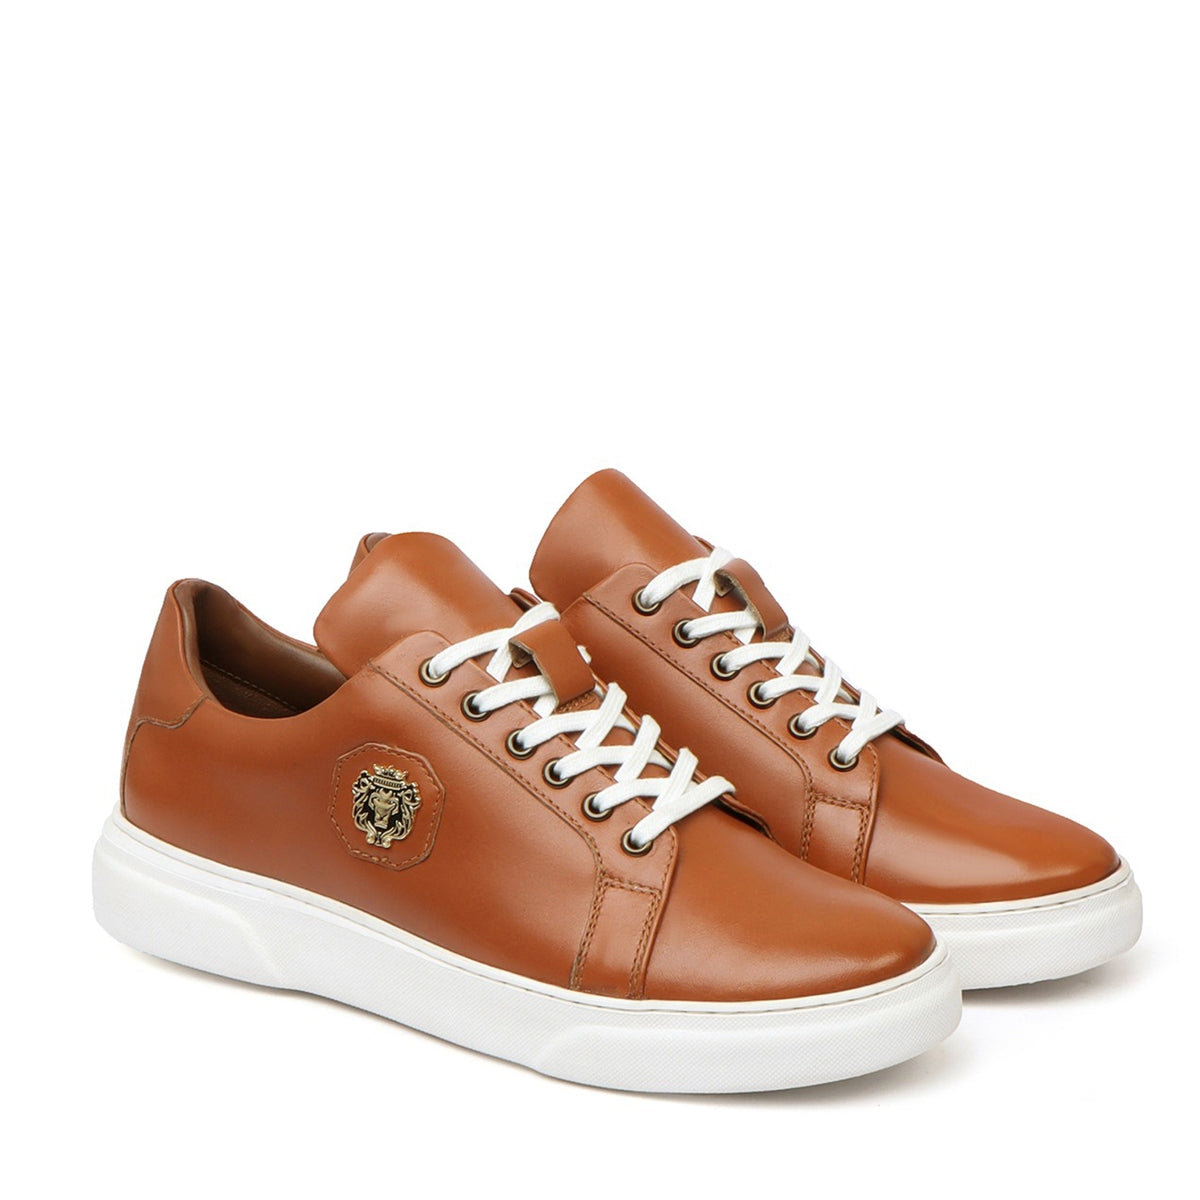 Tan Leather Low Top Sneaker with White Sole